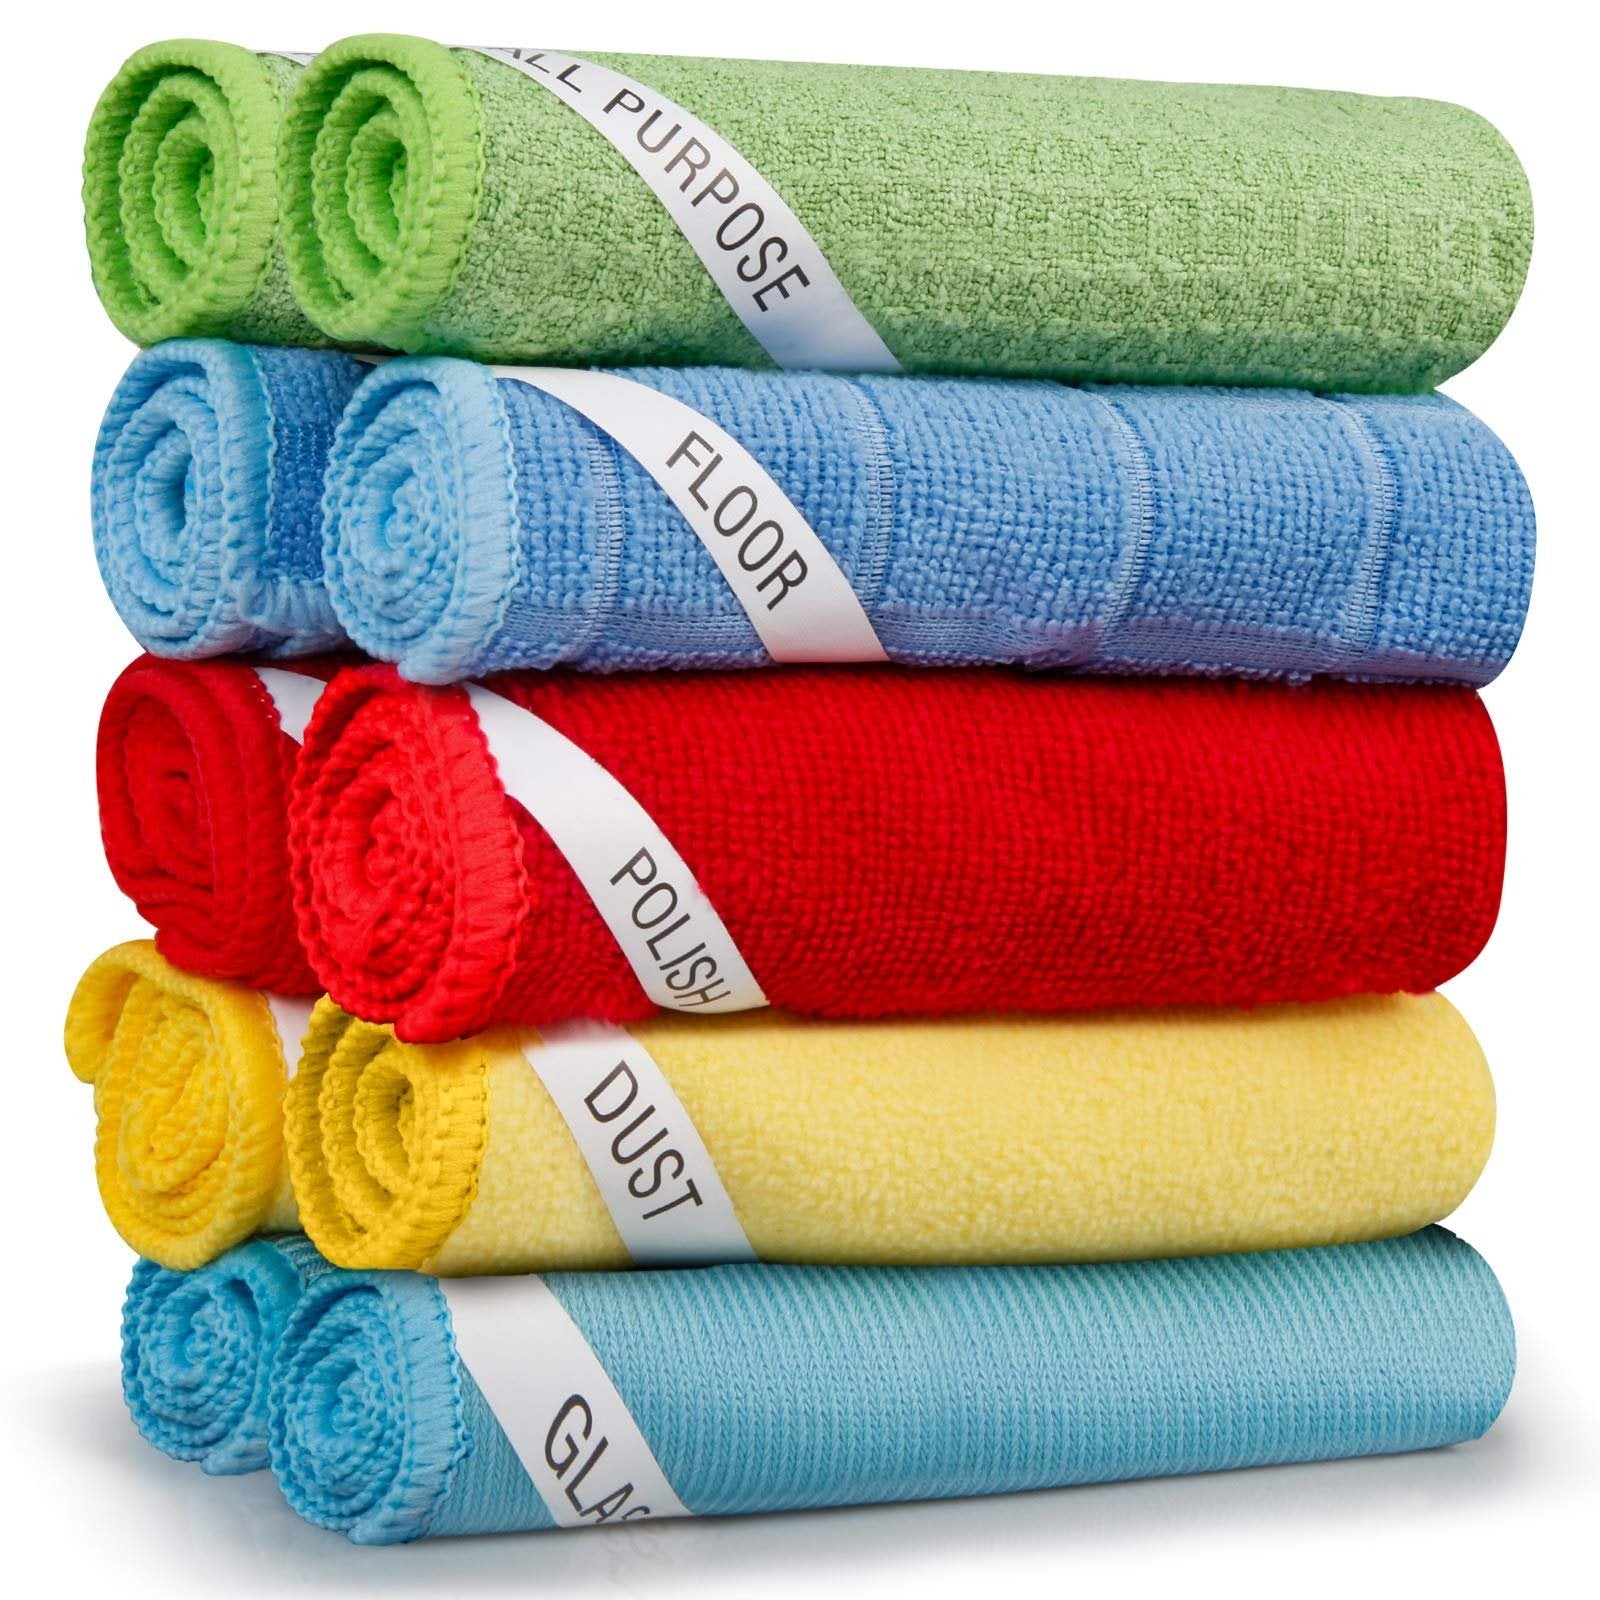 SUGARDAY Microfiber Cleaning Cloth Towels 15 Pack Reusable Dust